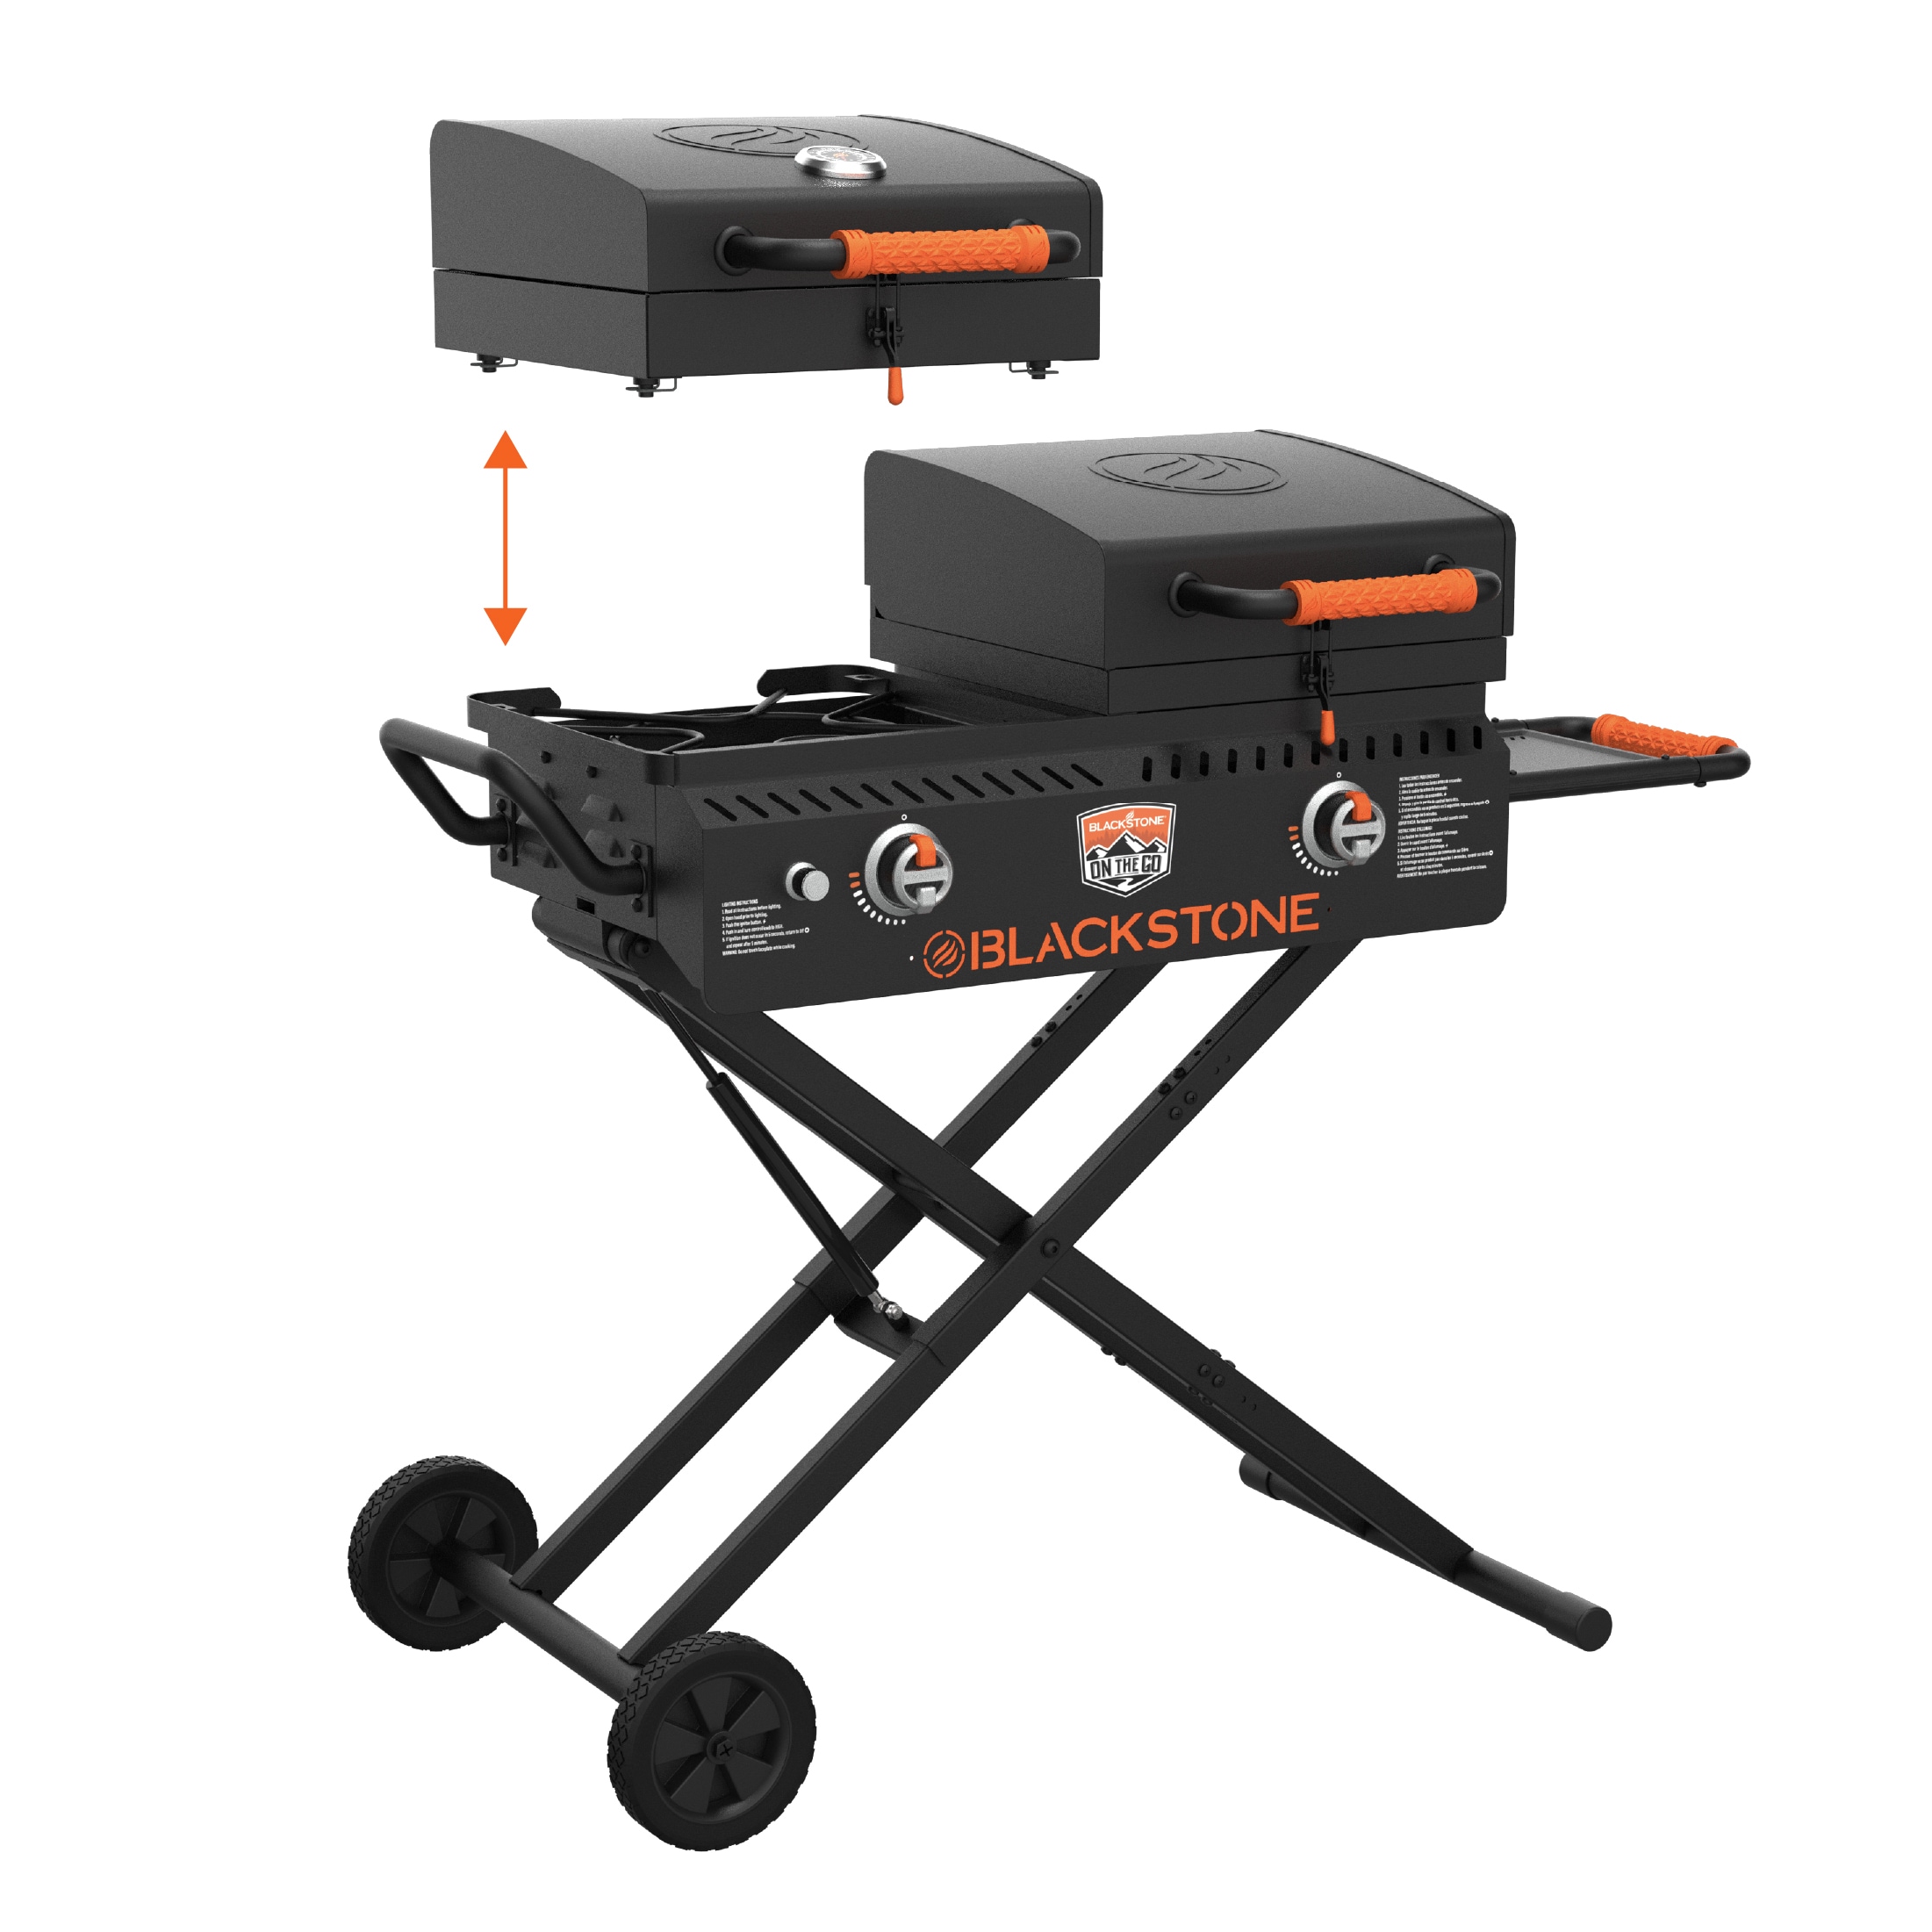 BLACKSTONE Tailgater Grill & Griddle, BLACKSTONE 17 in Griddle